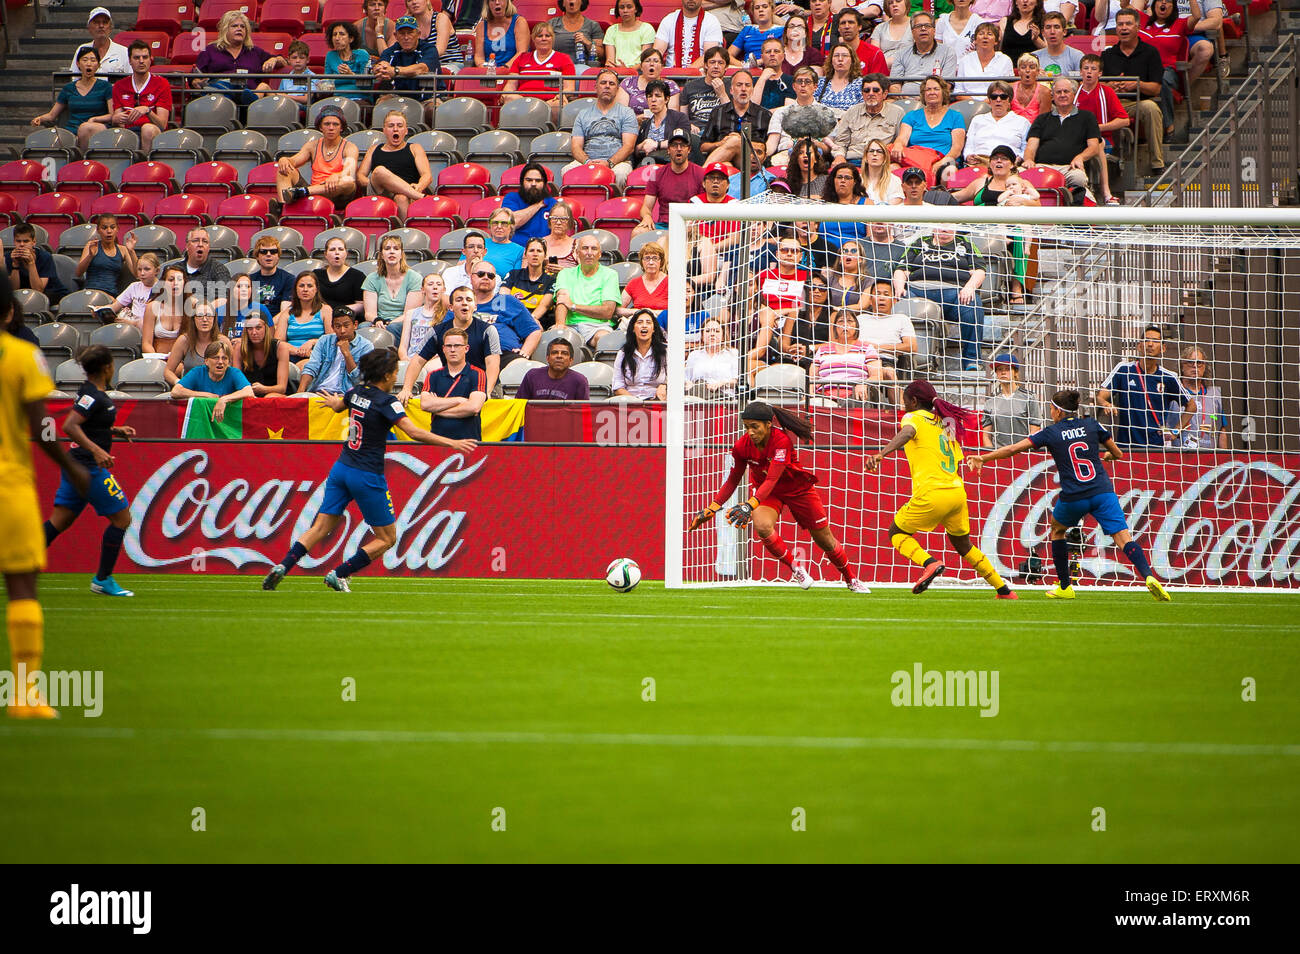 Vancouver, Canada. 8th June, 2015. Ecuador goalkeeper Shirley BERRUZ (#1) dives to protect the ball during the opening round match between Cameroon and Ecuador of the FIFA Women's World Cup Canada 2015 at BC Place Stadium. Cameroon won the match 6-0. Credit:  Matt Jacques/Alamy Live News Stock Photo